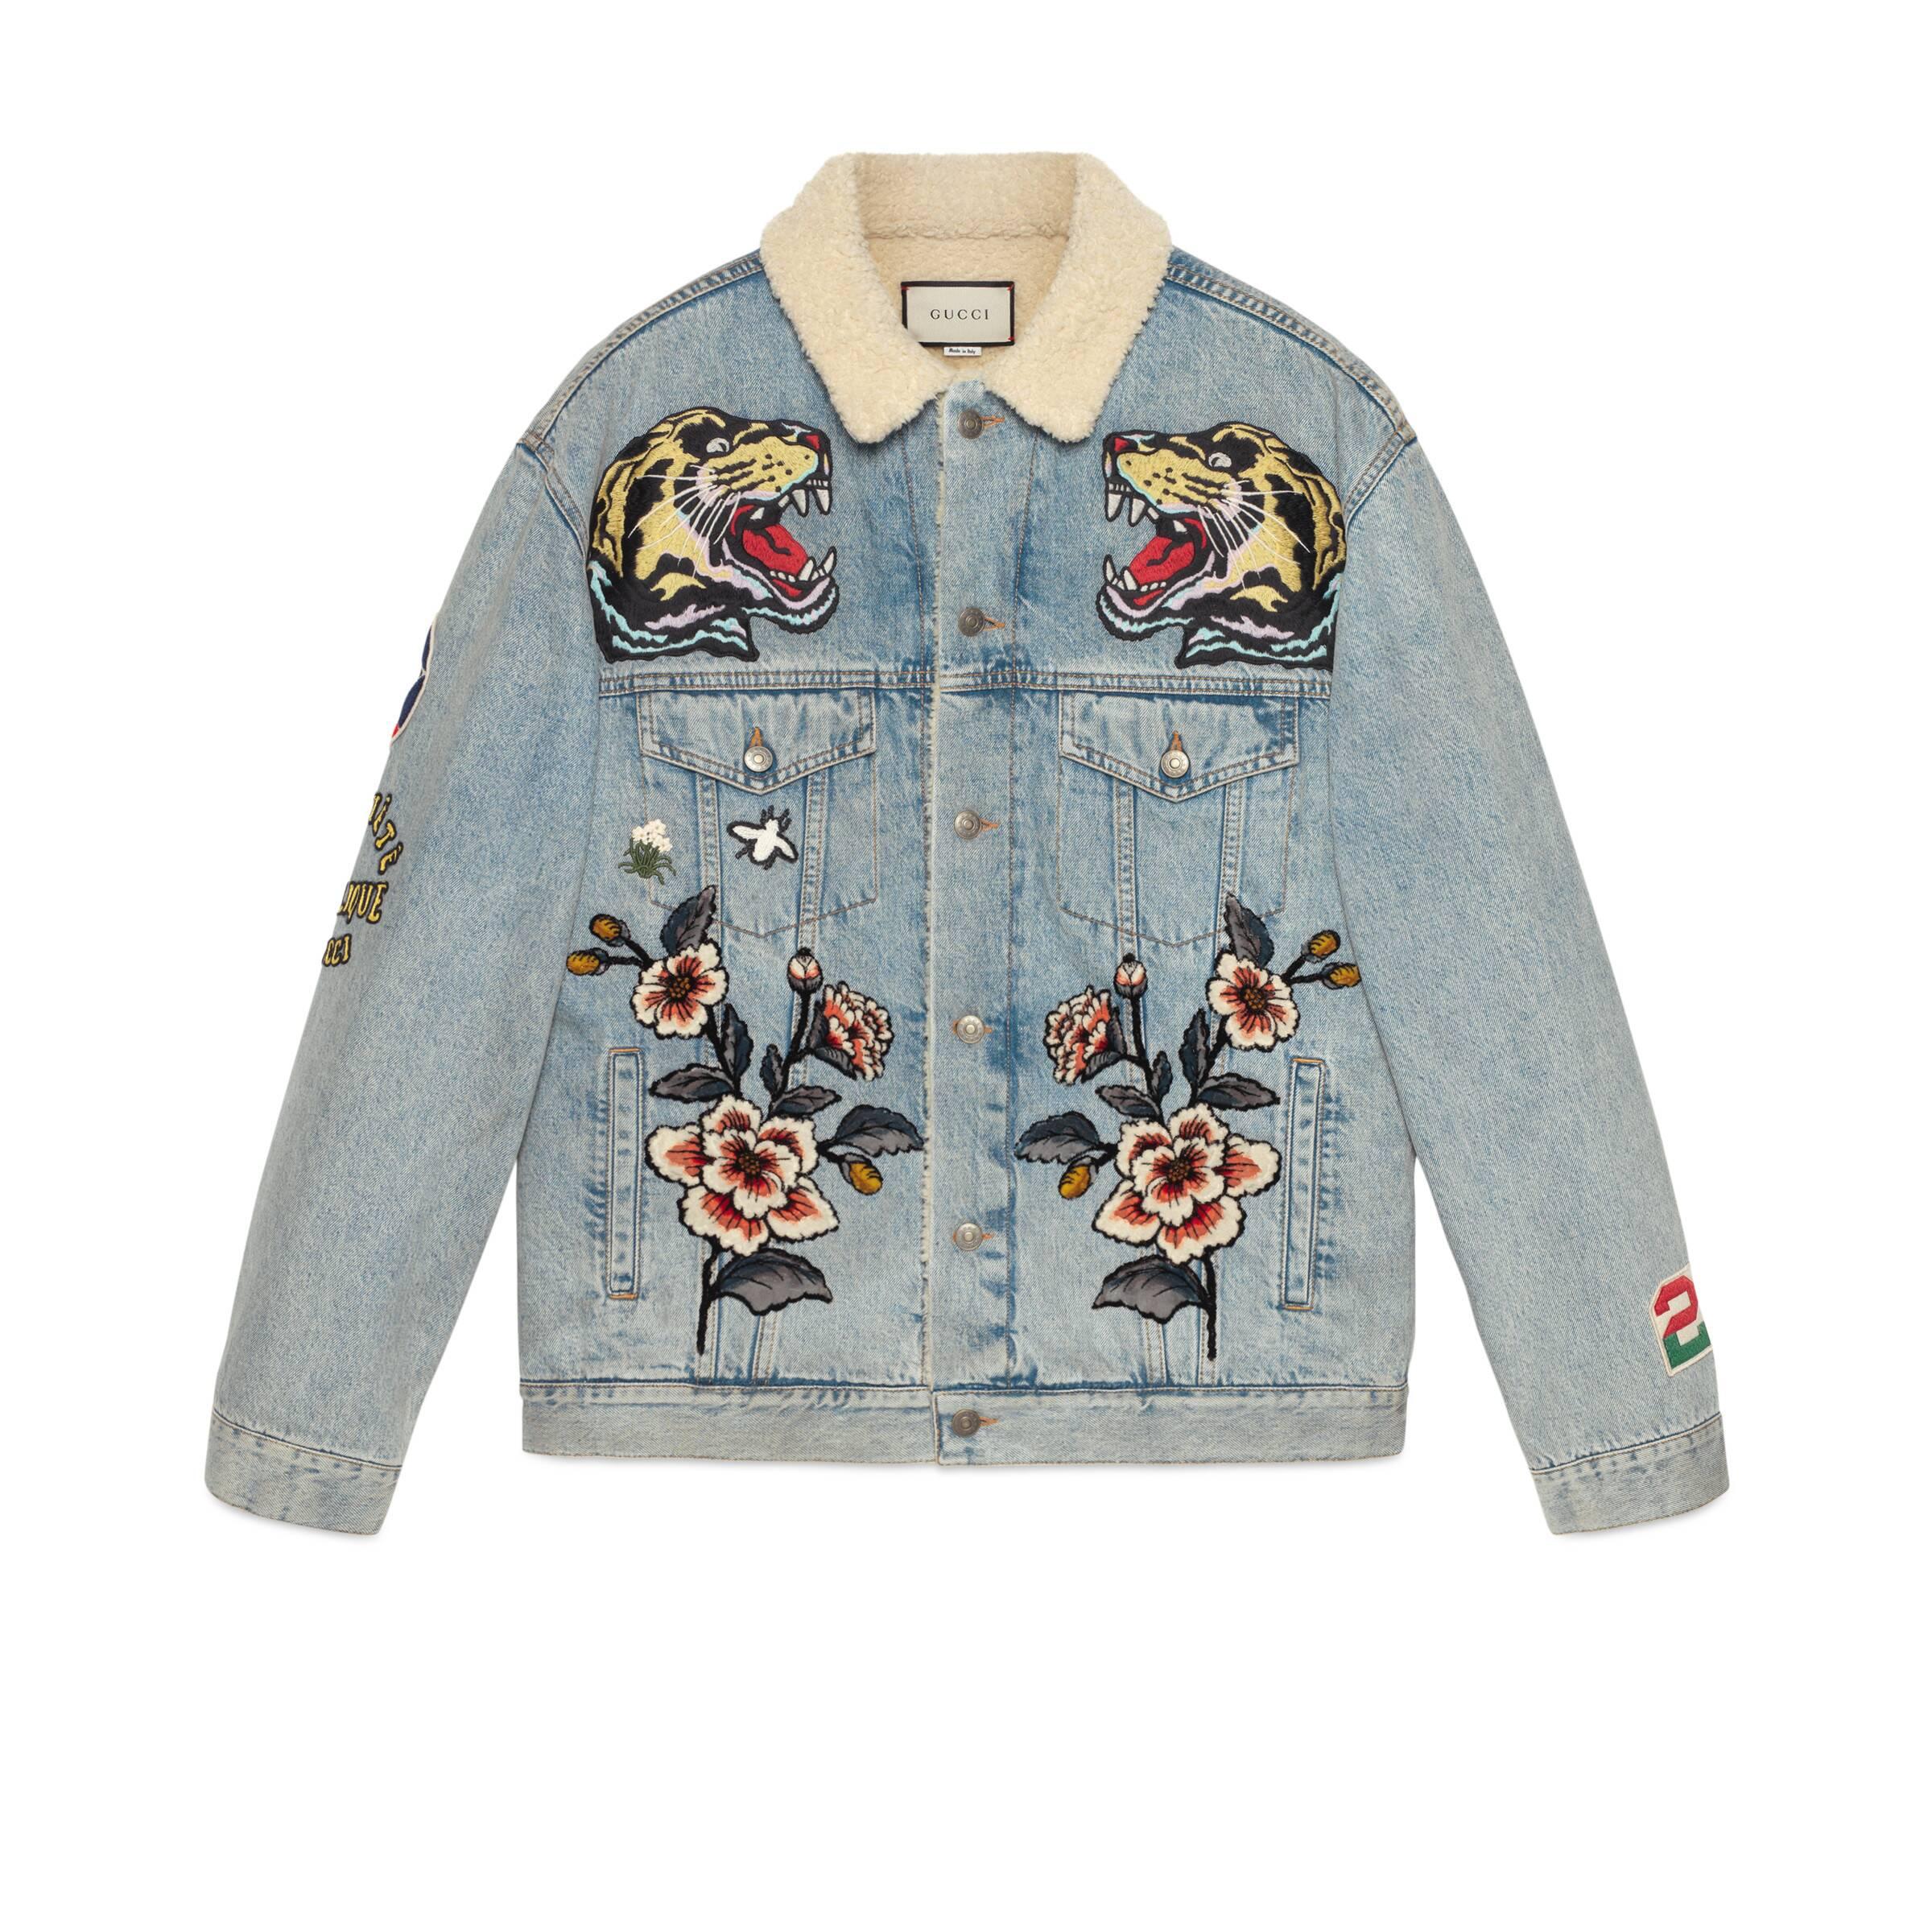 Gucci Oversize Denim Jacket With 